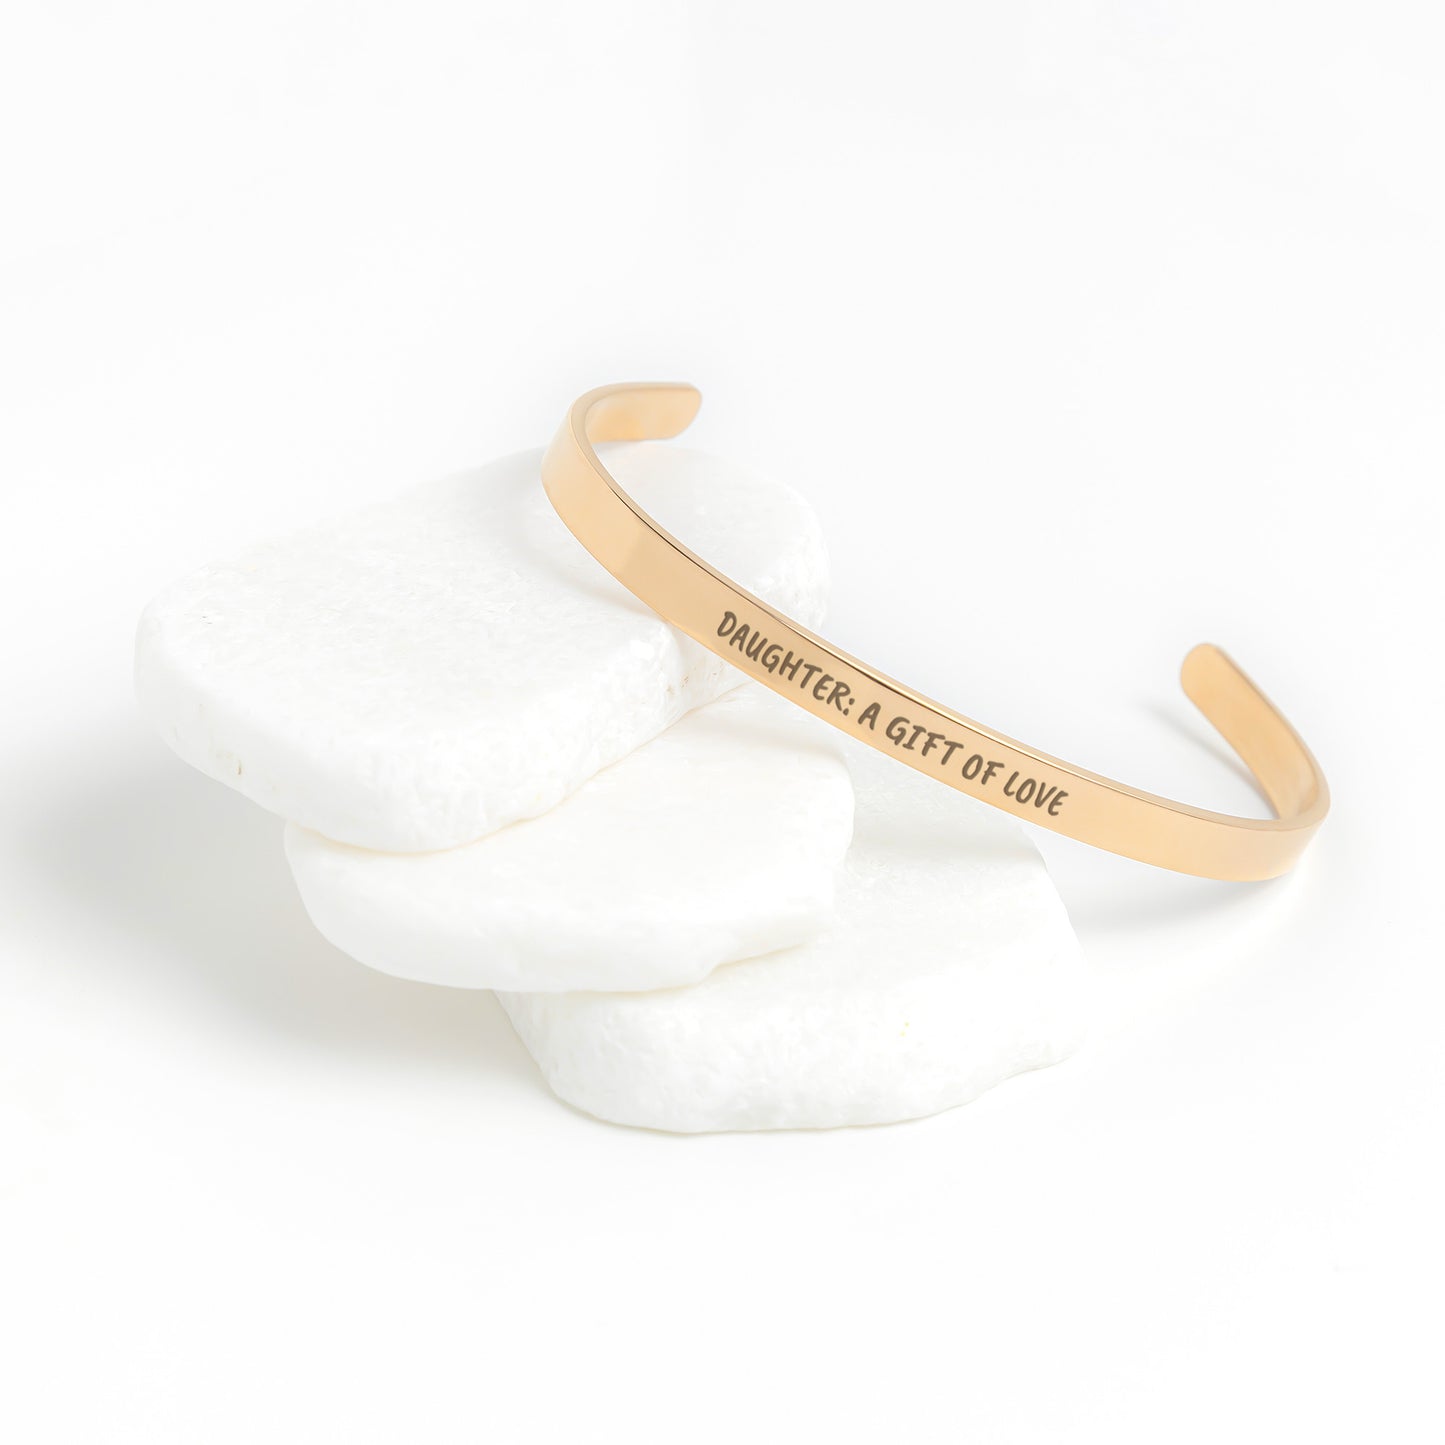 Gift For Daughter | Daughter: A Gift Of Love Cuff Bracelet